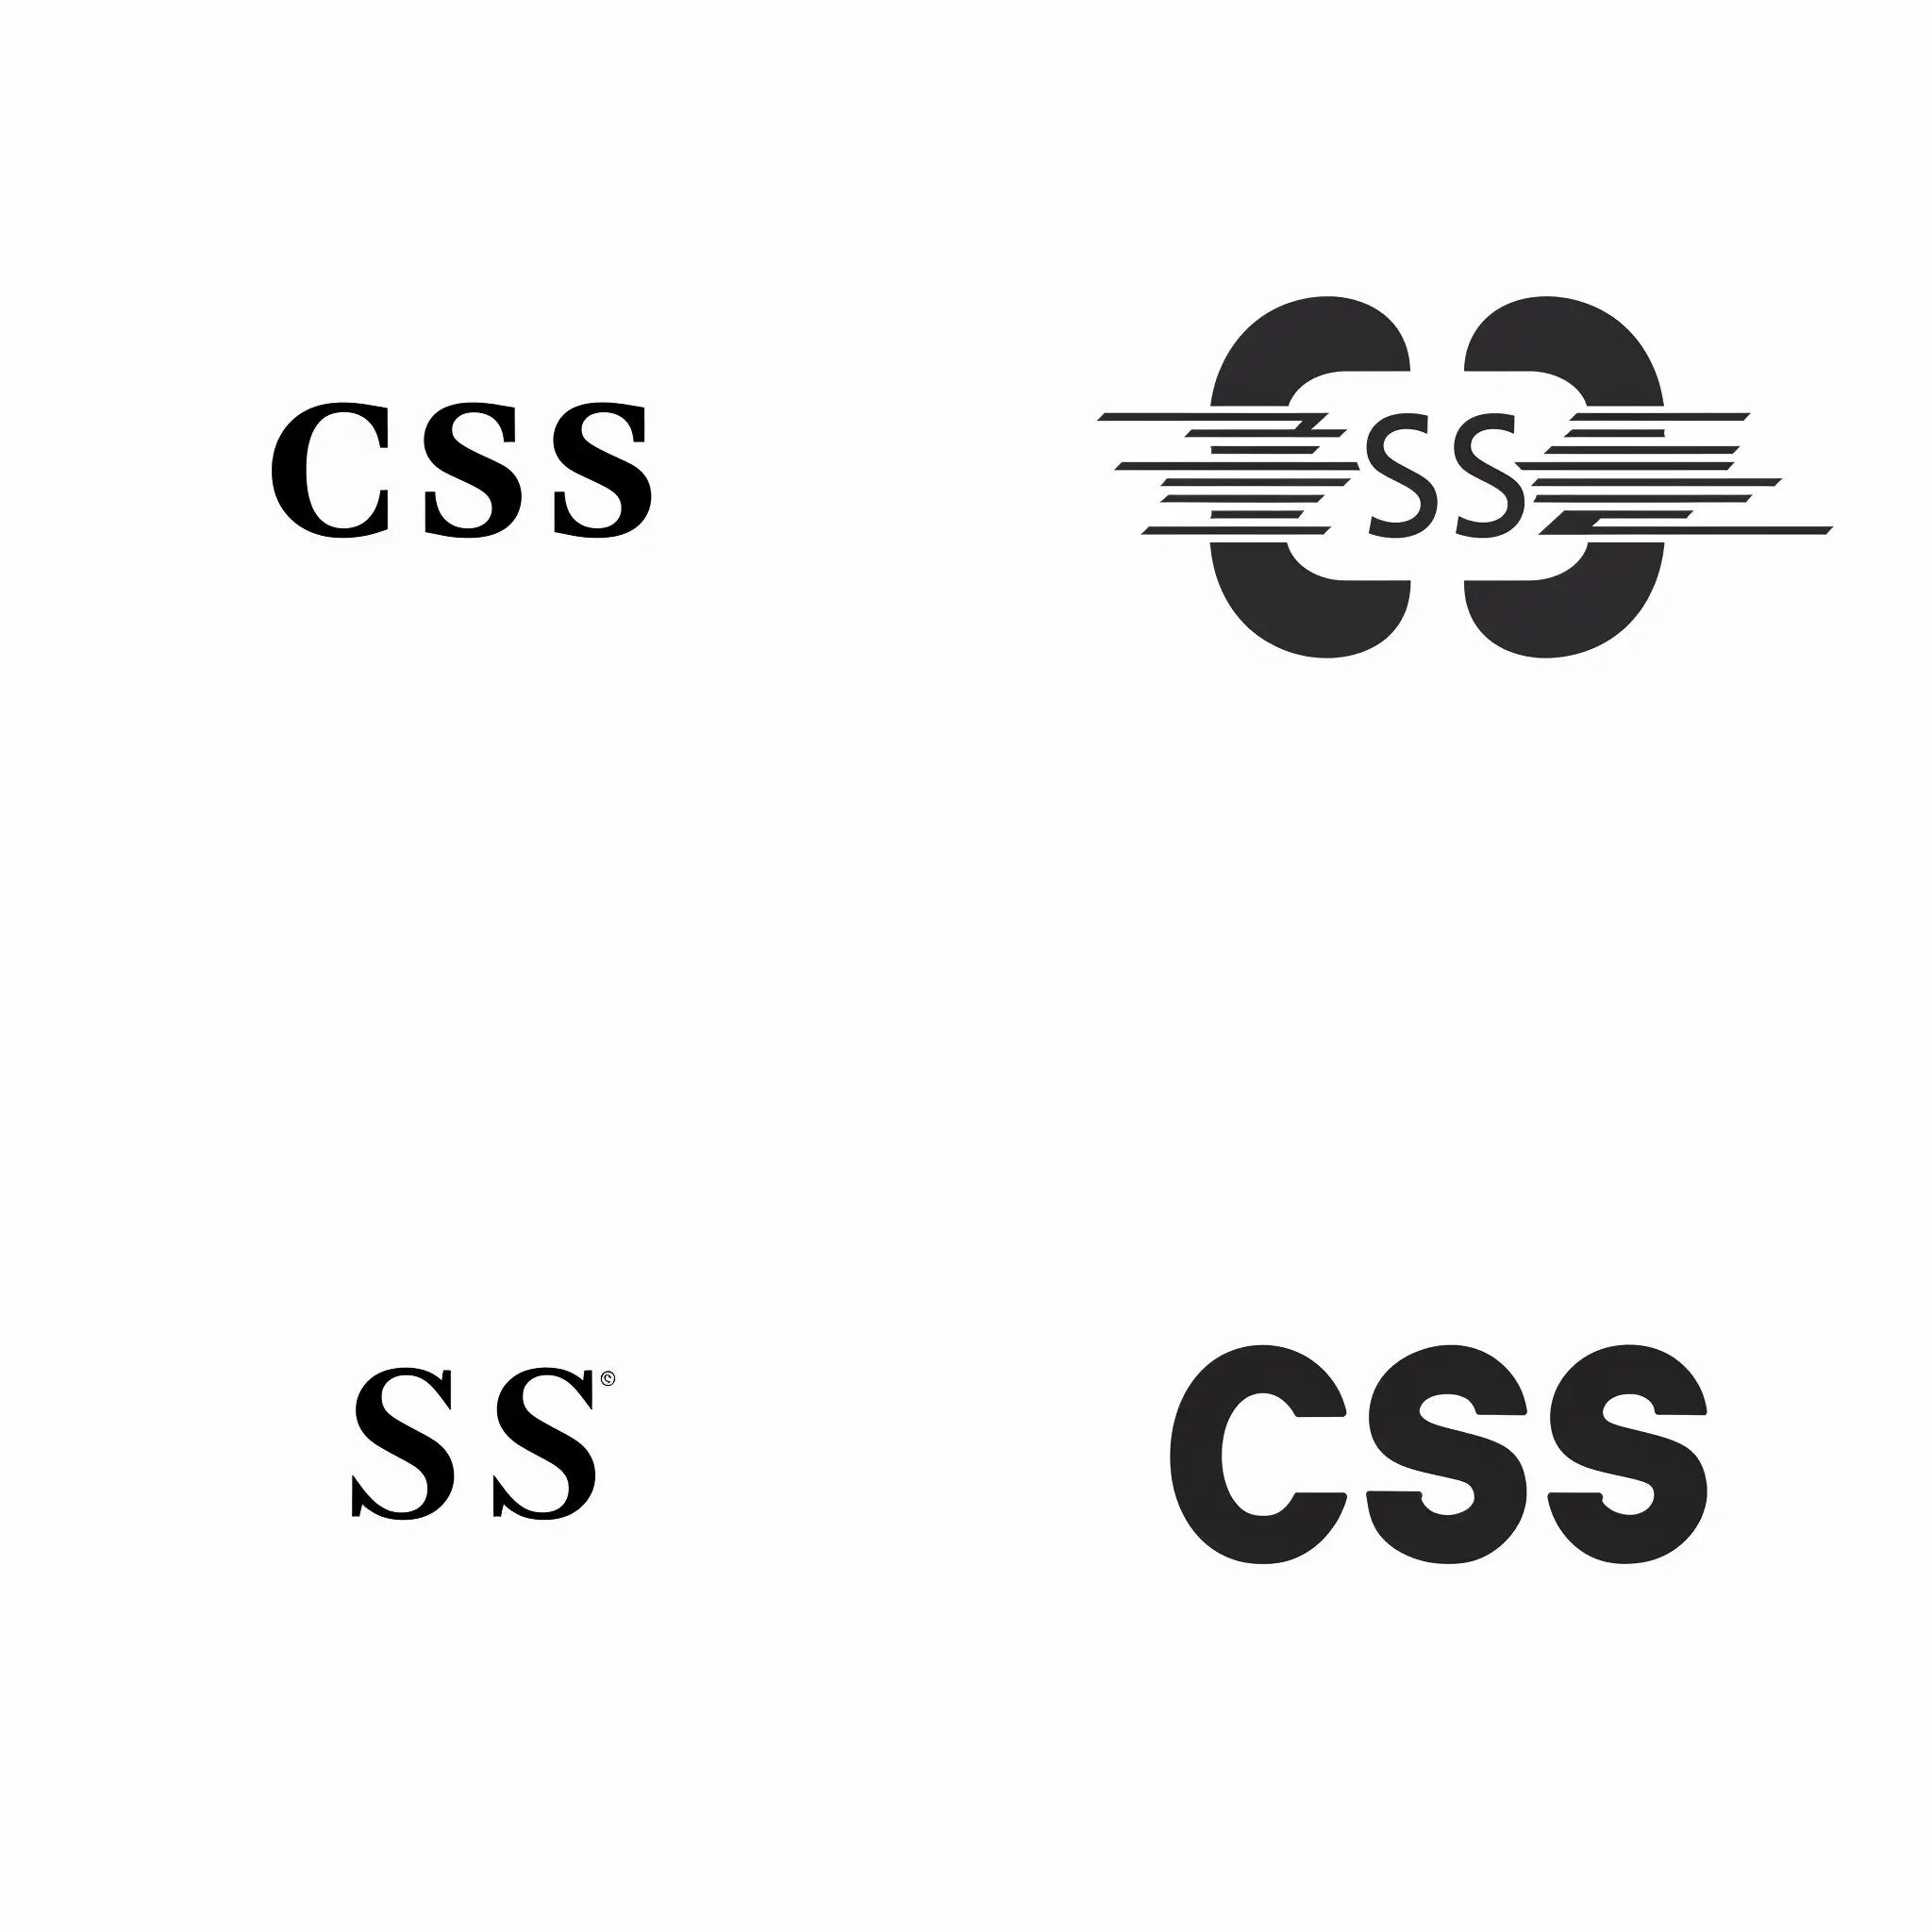 lettermark logo, simple vector image, flat image, black image, white background, contains letter C S S - no shading

 --v 6 --ar 1:1 --no 77049